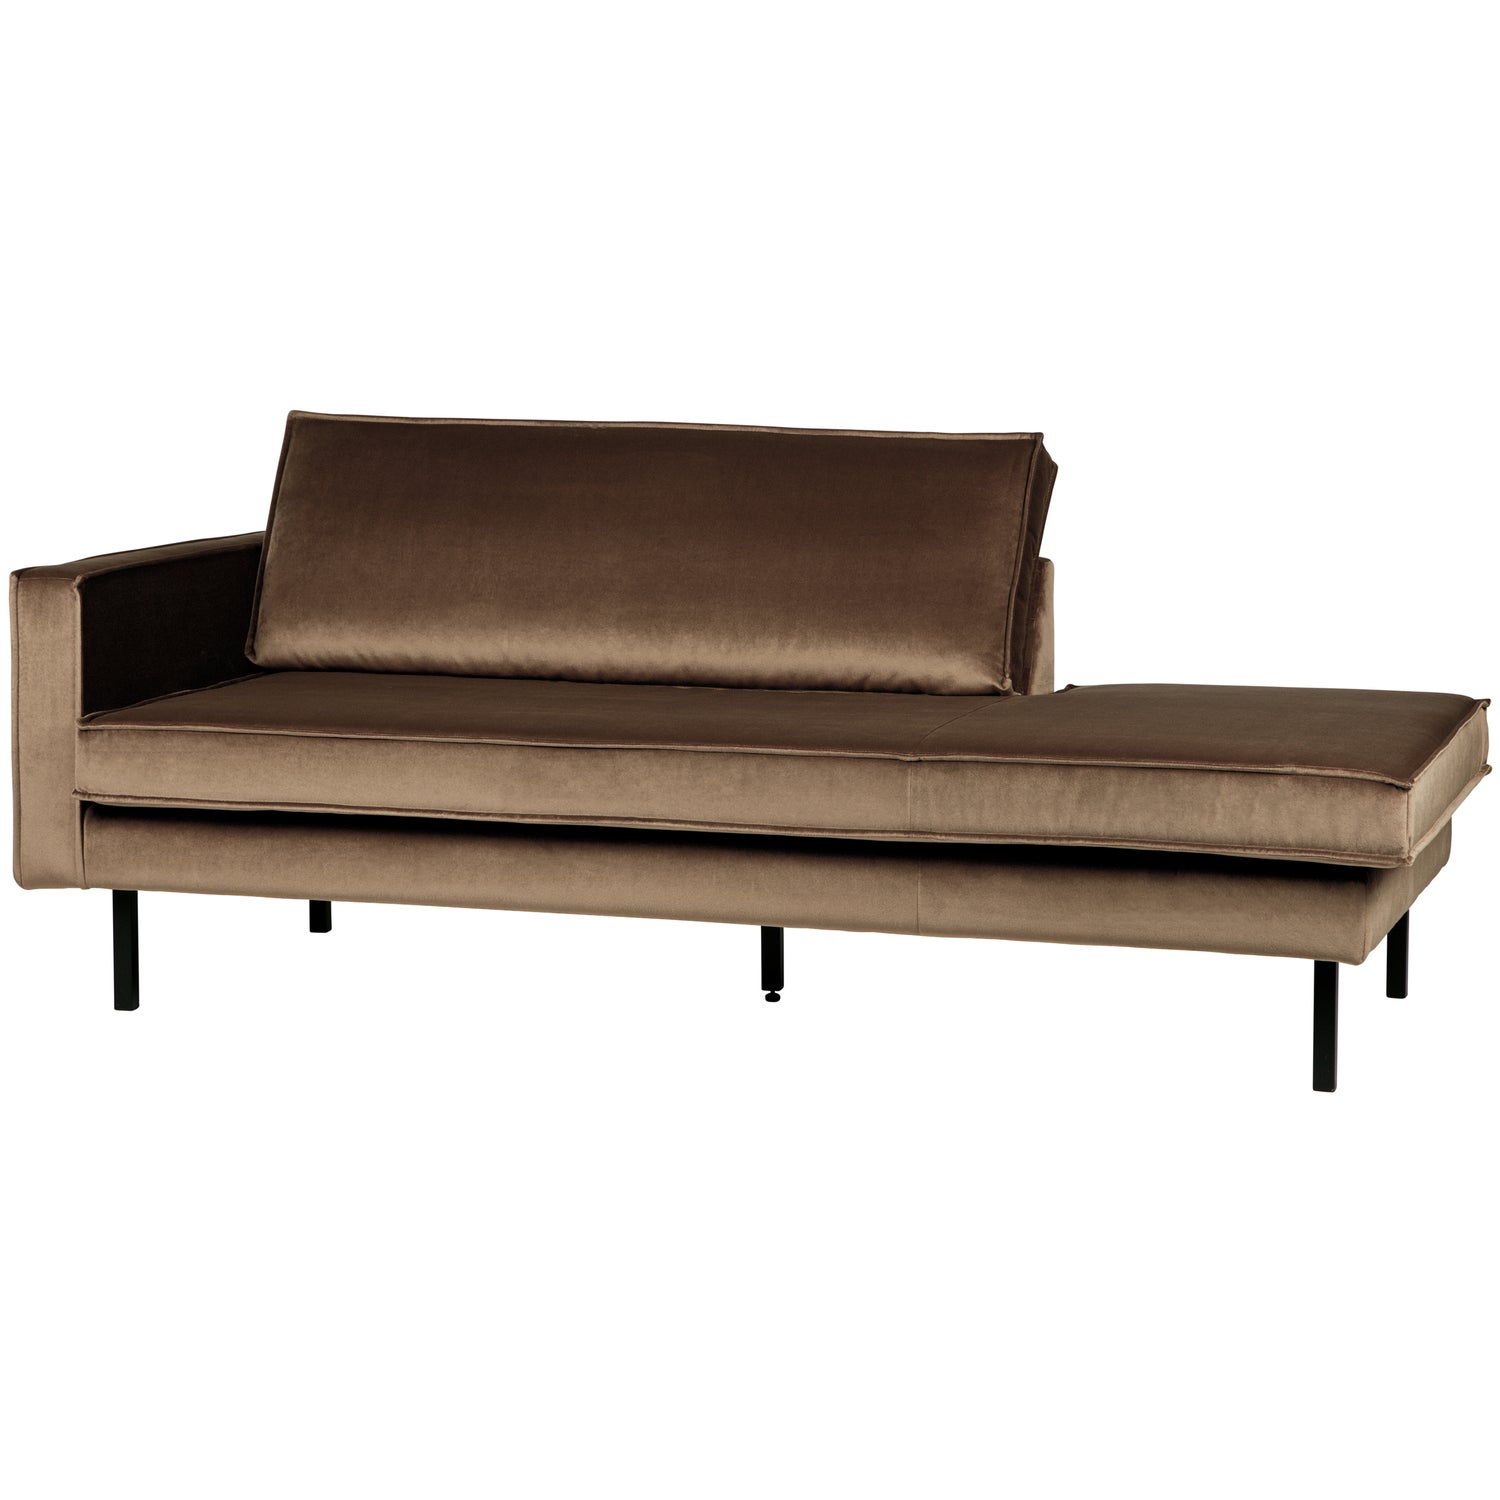 800743-12-02_VS_BP_Rodeo_daybed_left_taupe.jpg?auto=webp&format=png&width=1500&height=1500